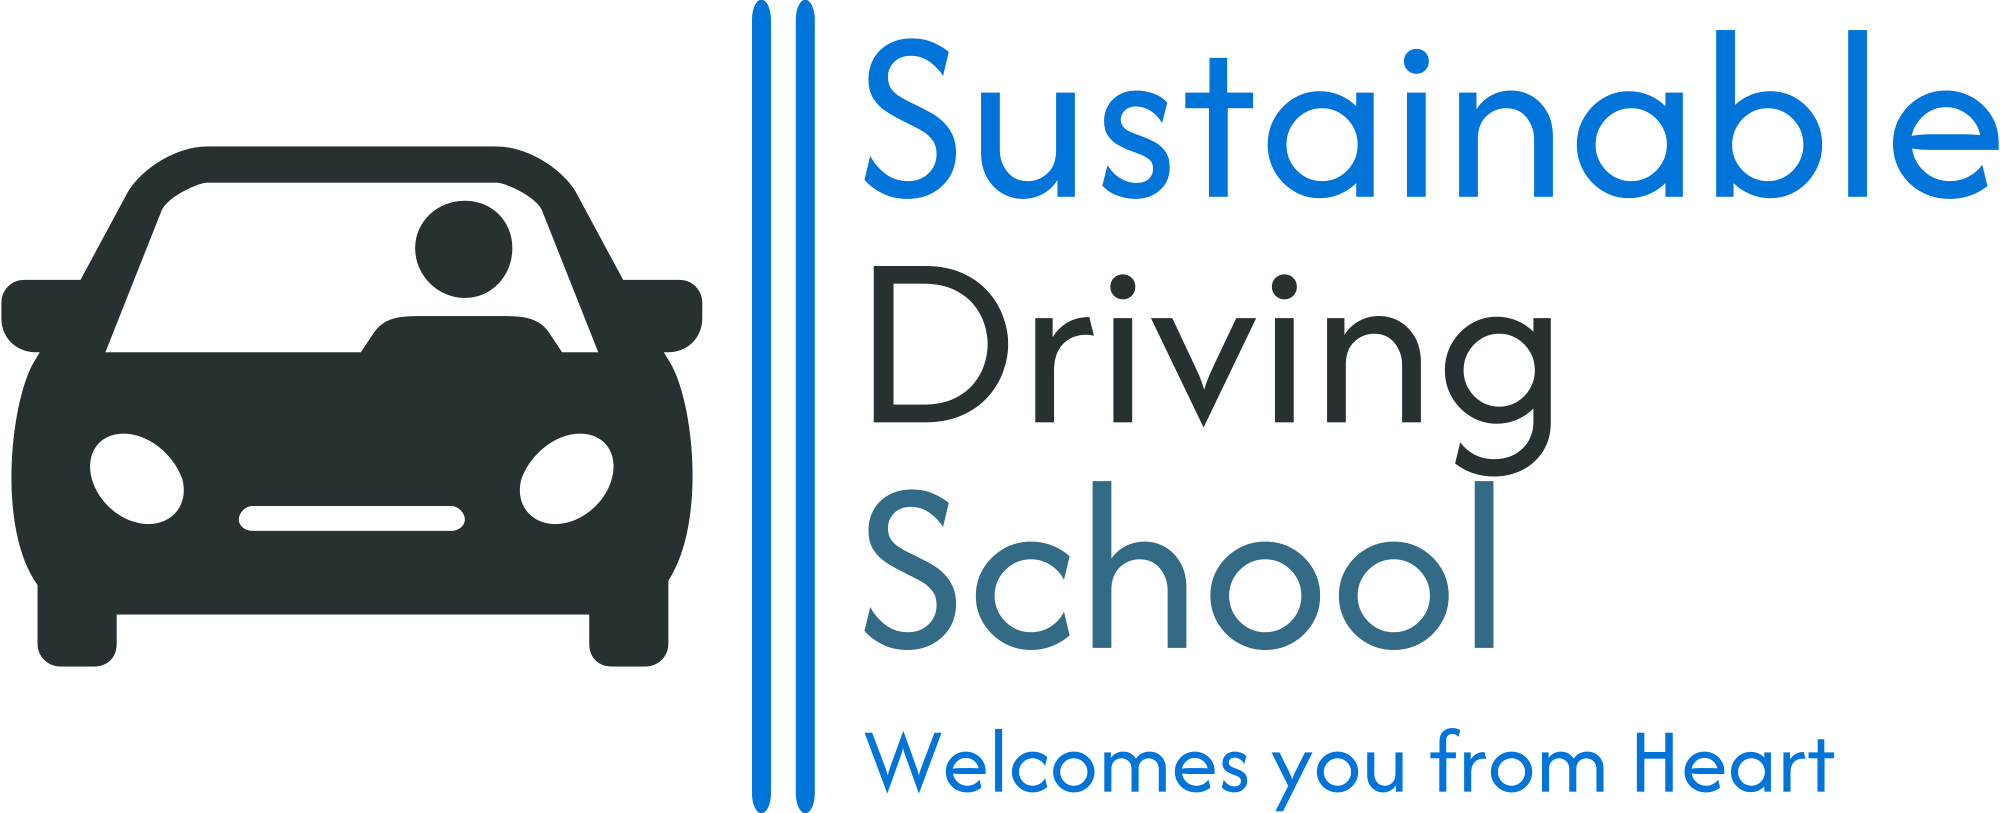 sustainable driving school high resolution logo transparent 1 e1715796862904